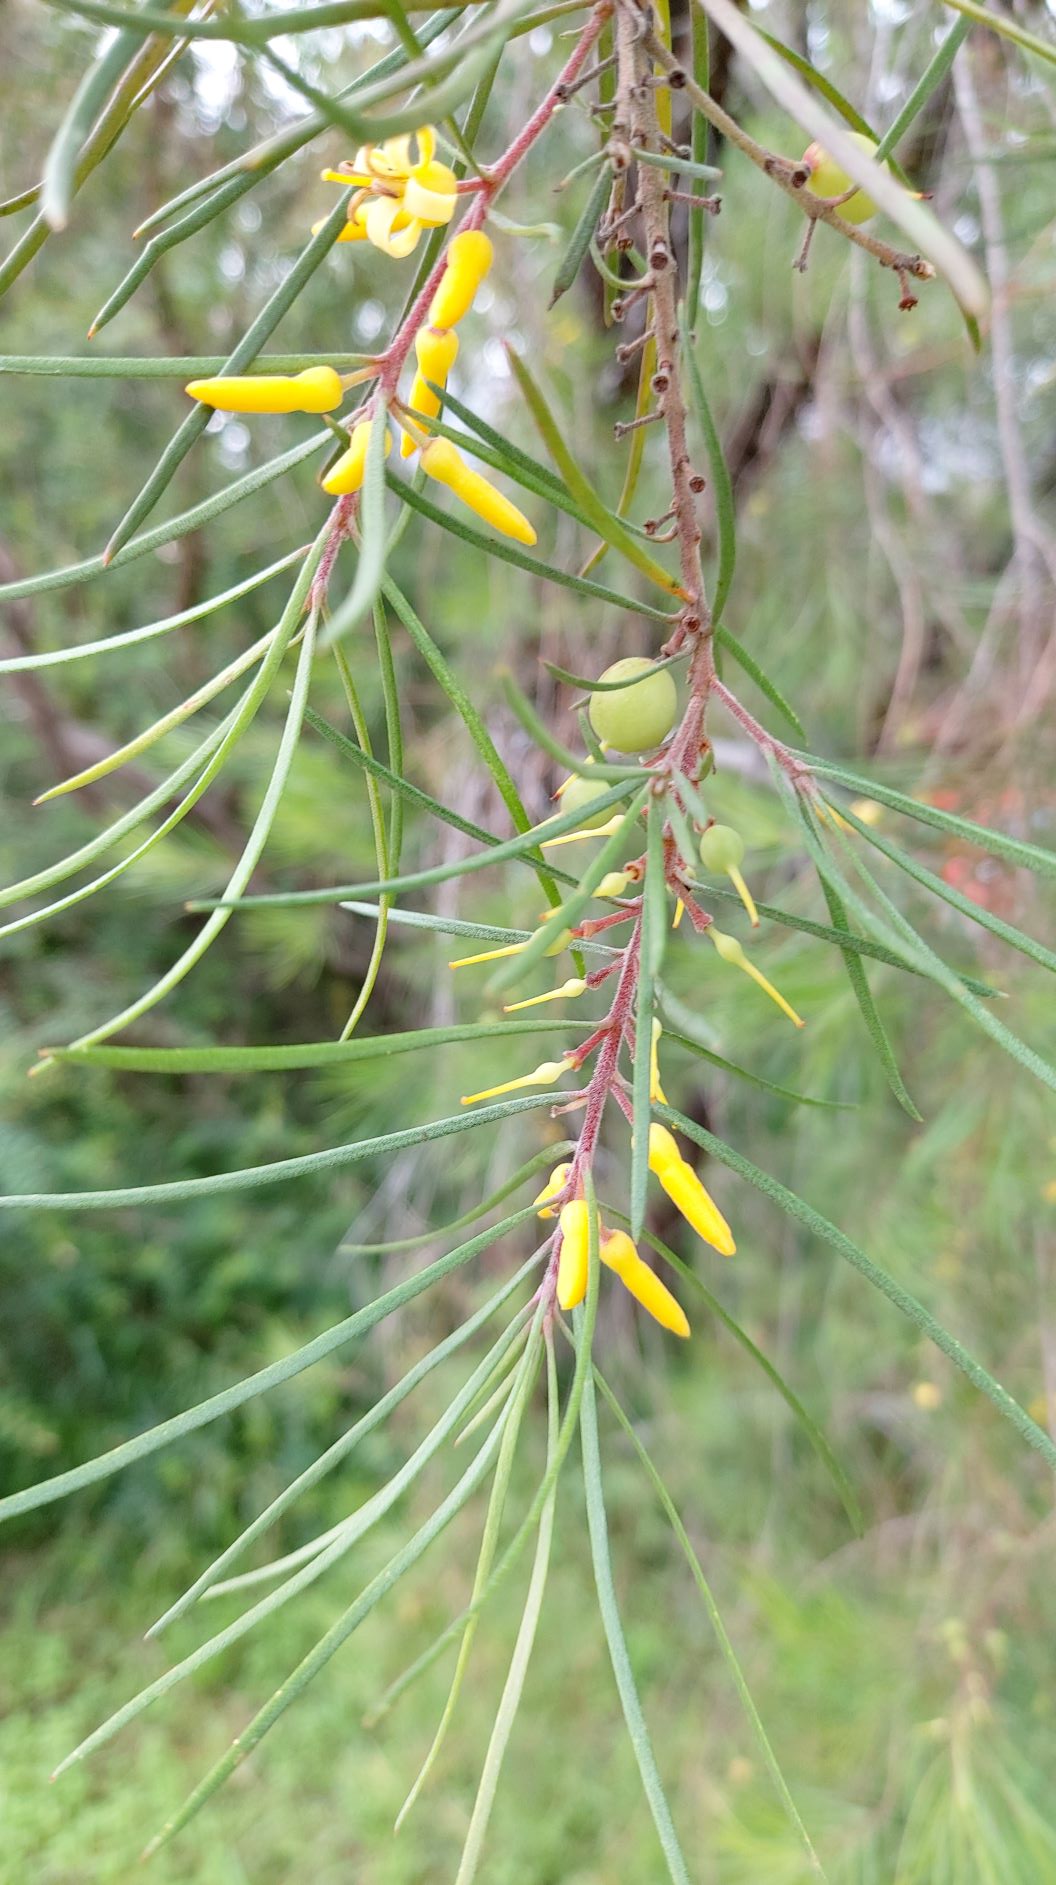 Persoonia linearis fruits, flowers, buds and leaves